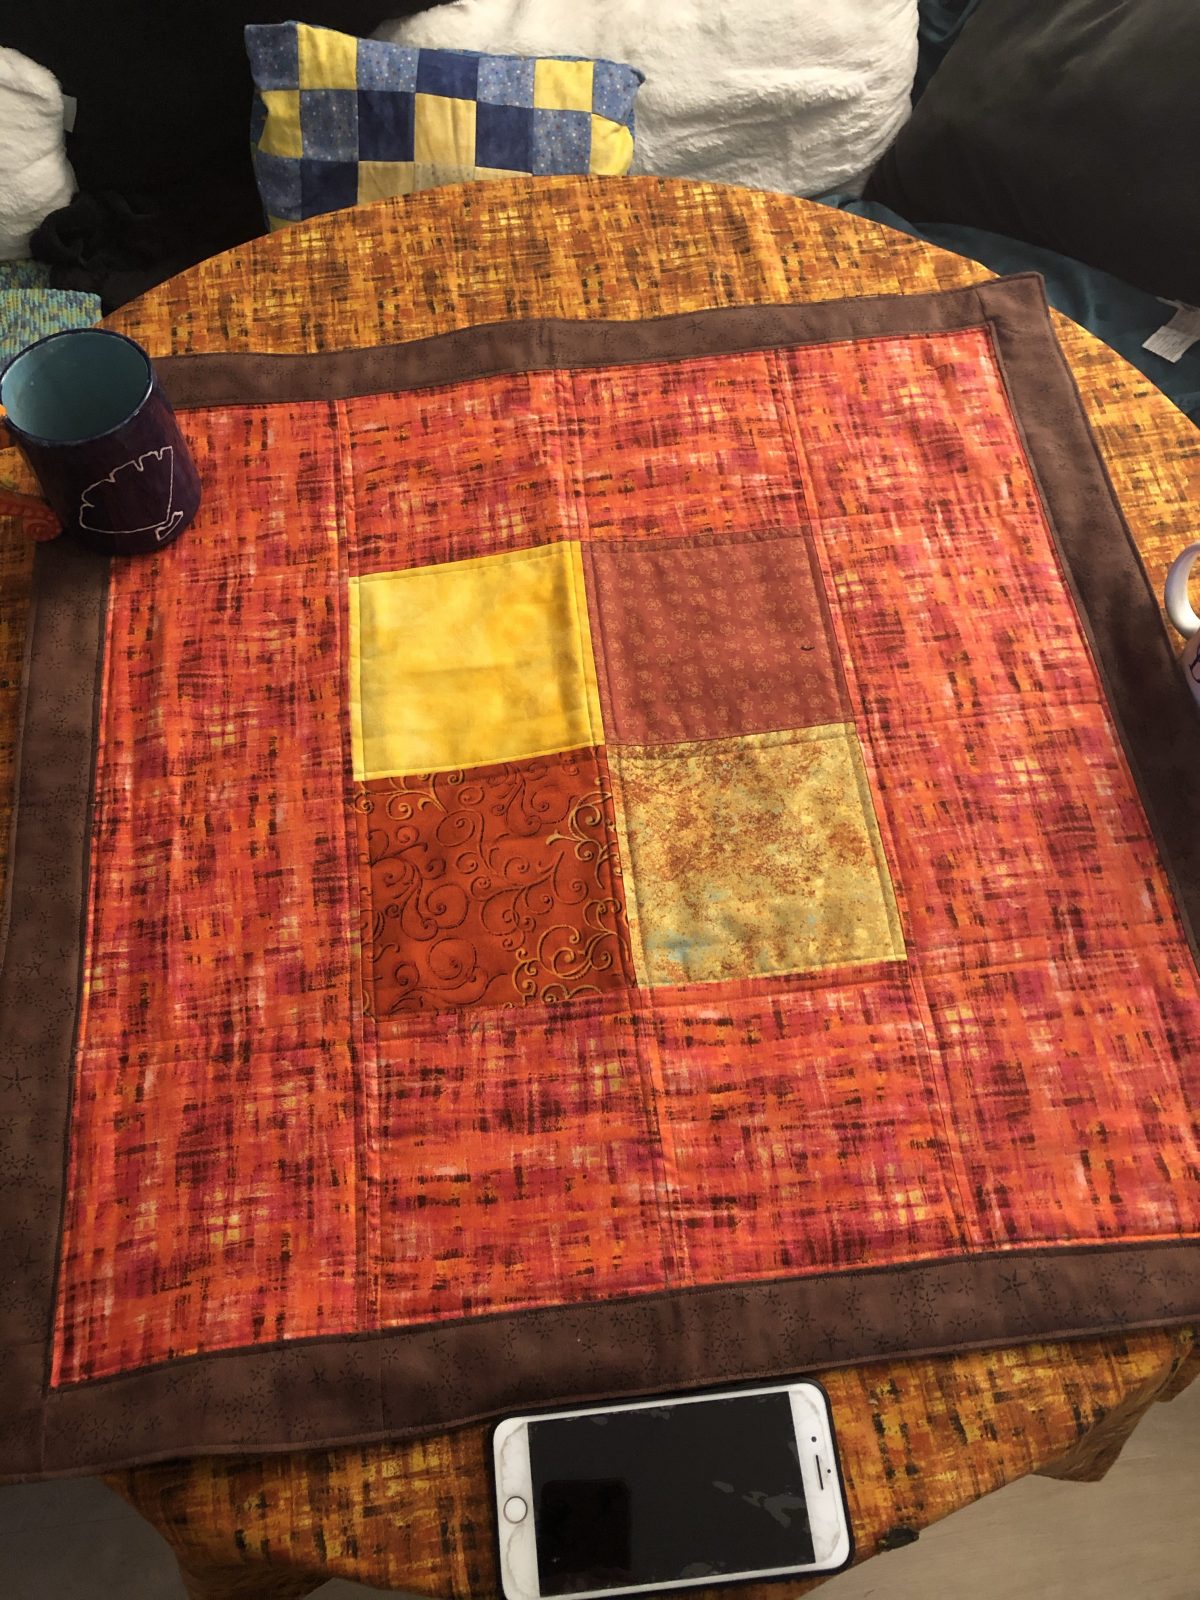 Quilt Diary:  First finish of Quarter 4 – Holiday Tablecloths & Turkey Wooly Mug Rugs